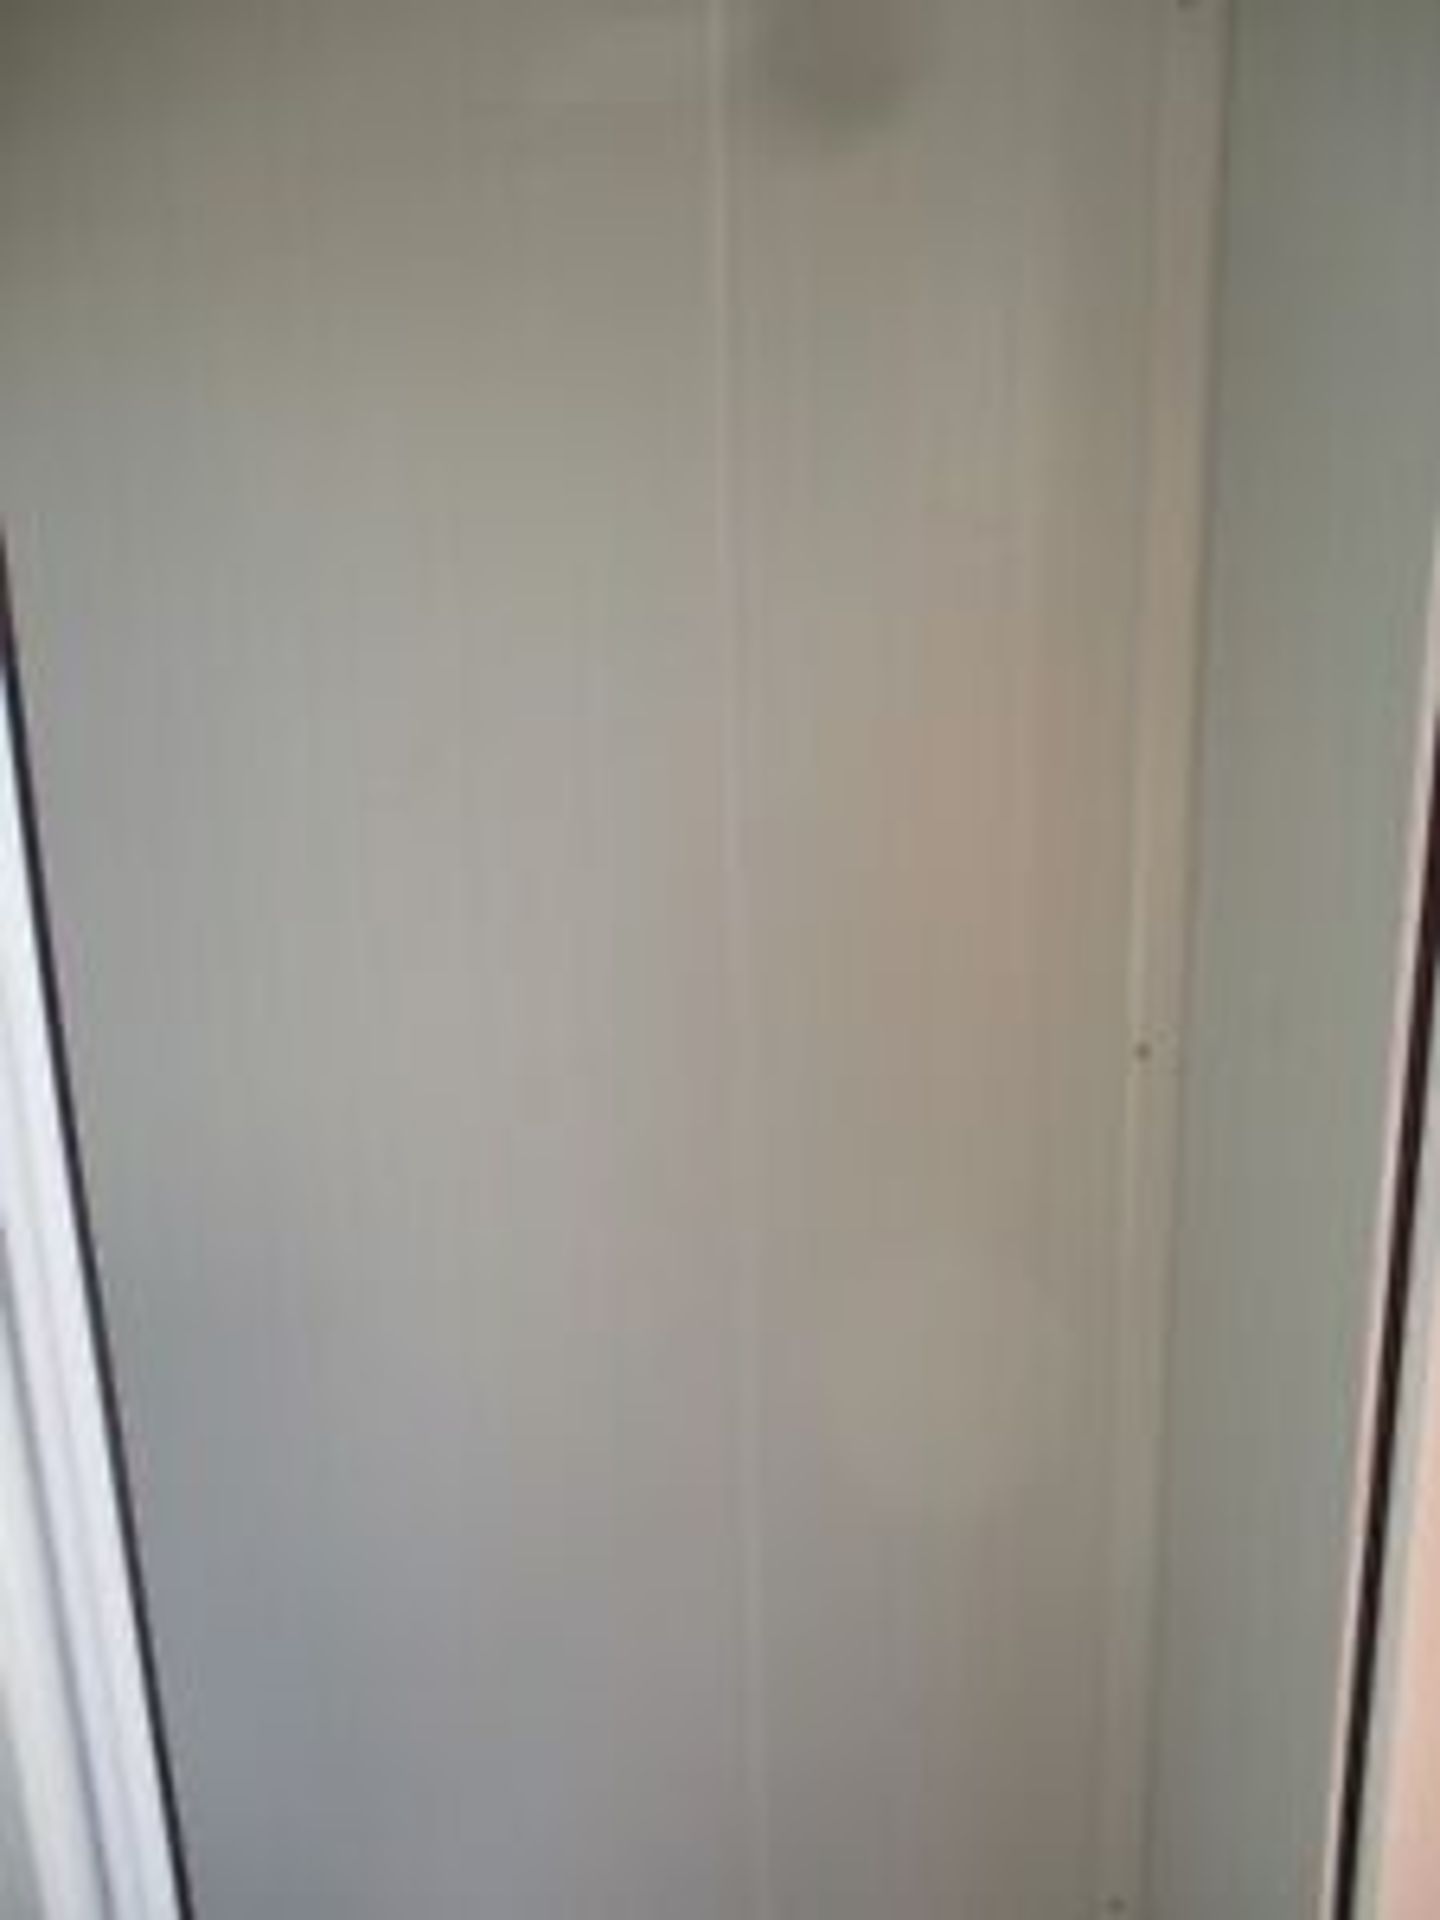 UNUSED ADACON 2.1M X 1.35M SHOWER TOILET BLOCK SHIPPING CONTAINER - Image 11 of 12